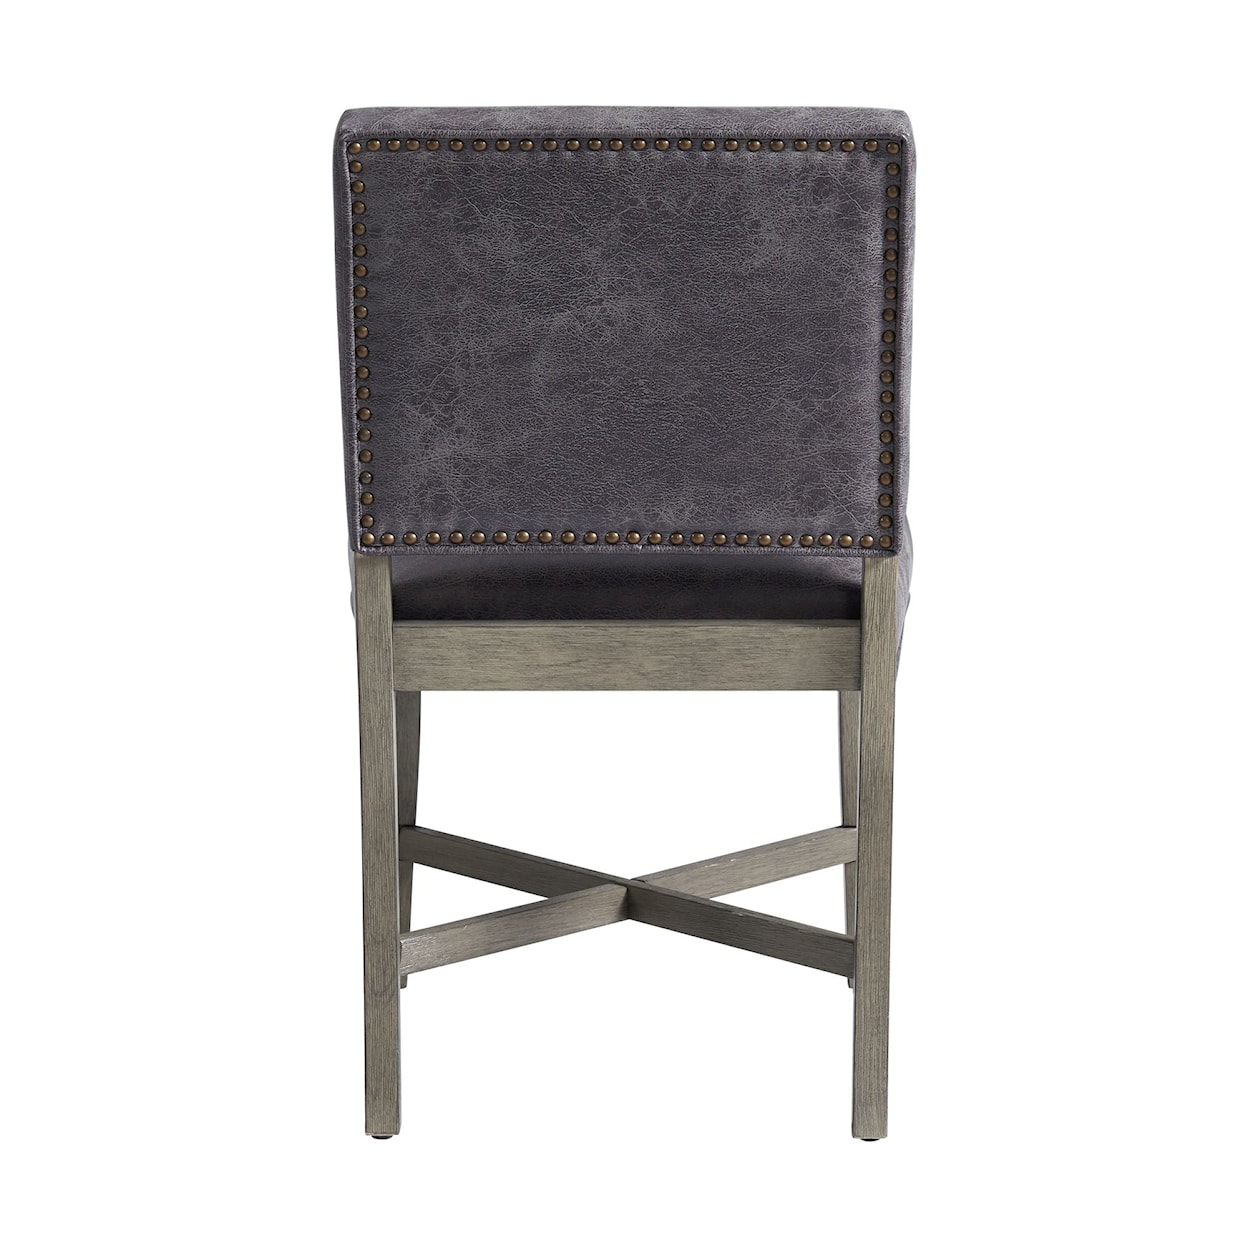 Elements International Collins Set of 2 Dining Side Chairs